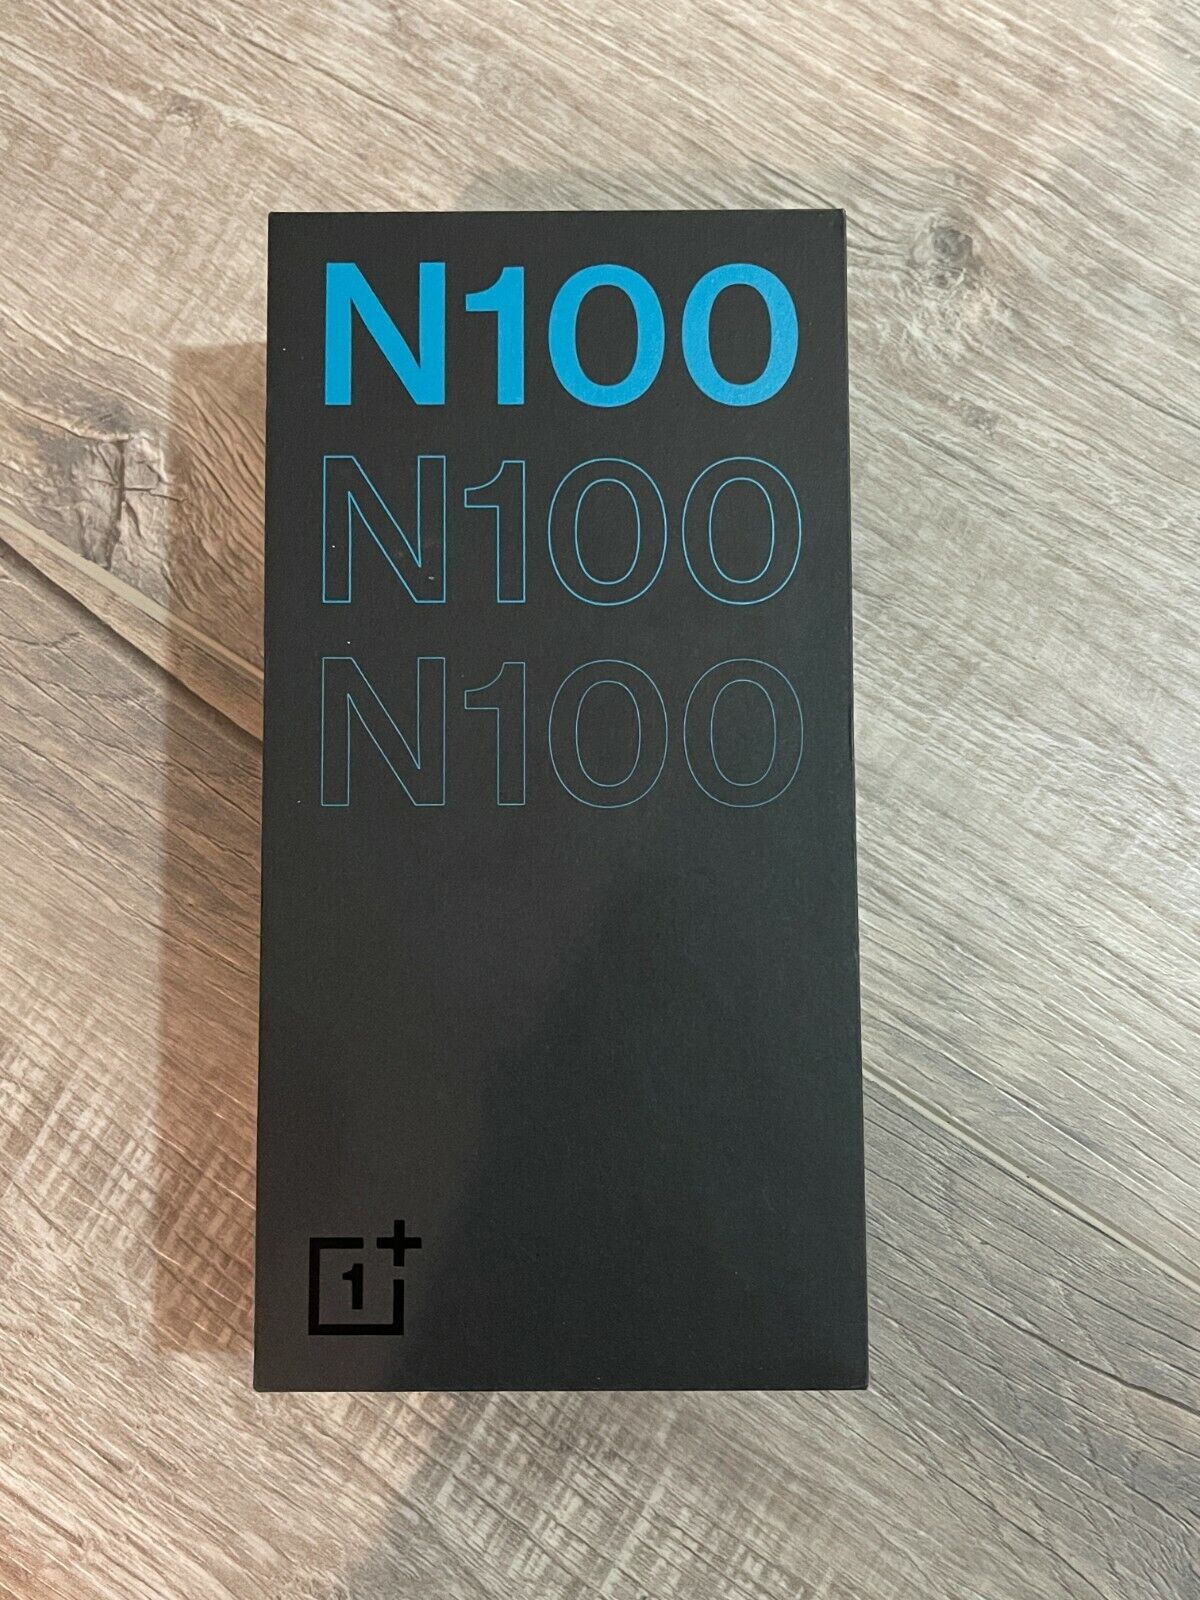 oneplus Nord N100 (4gb/64gb) box pack brand new pta approved 10/10 pack set (contact 03452174314)